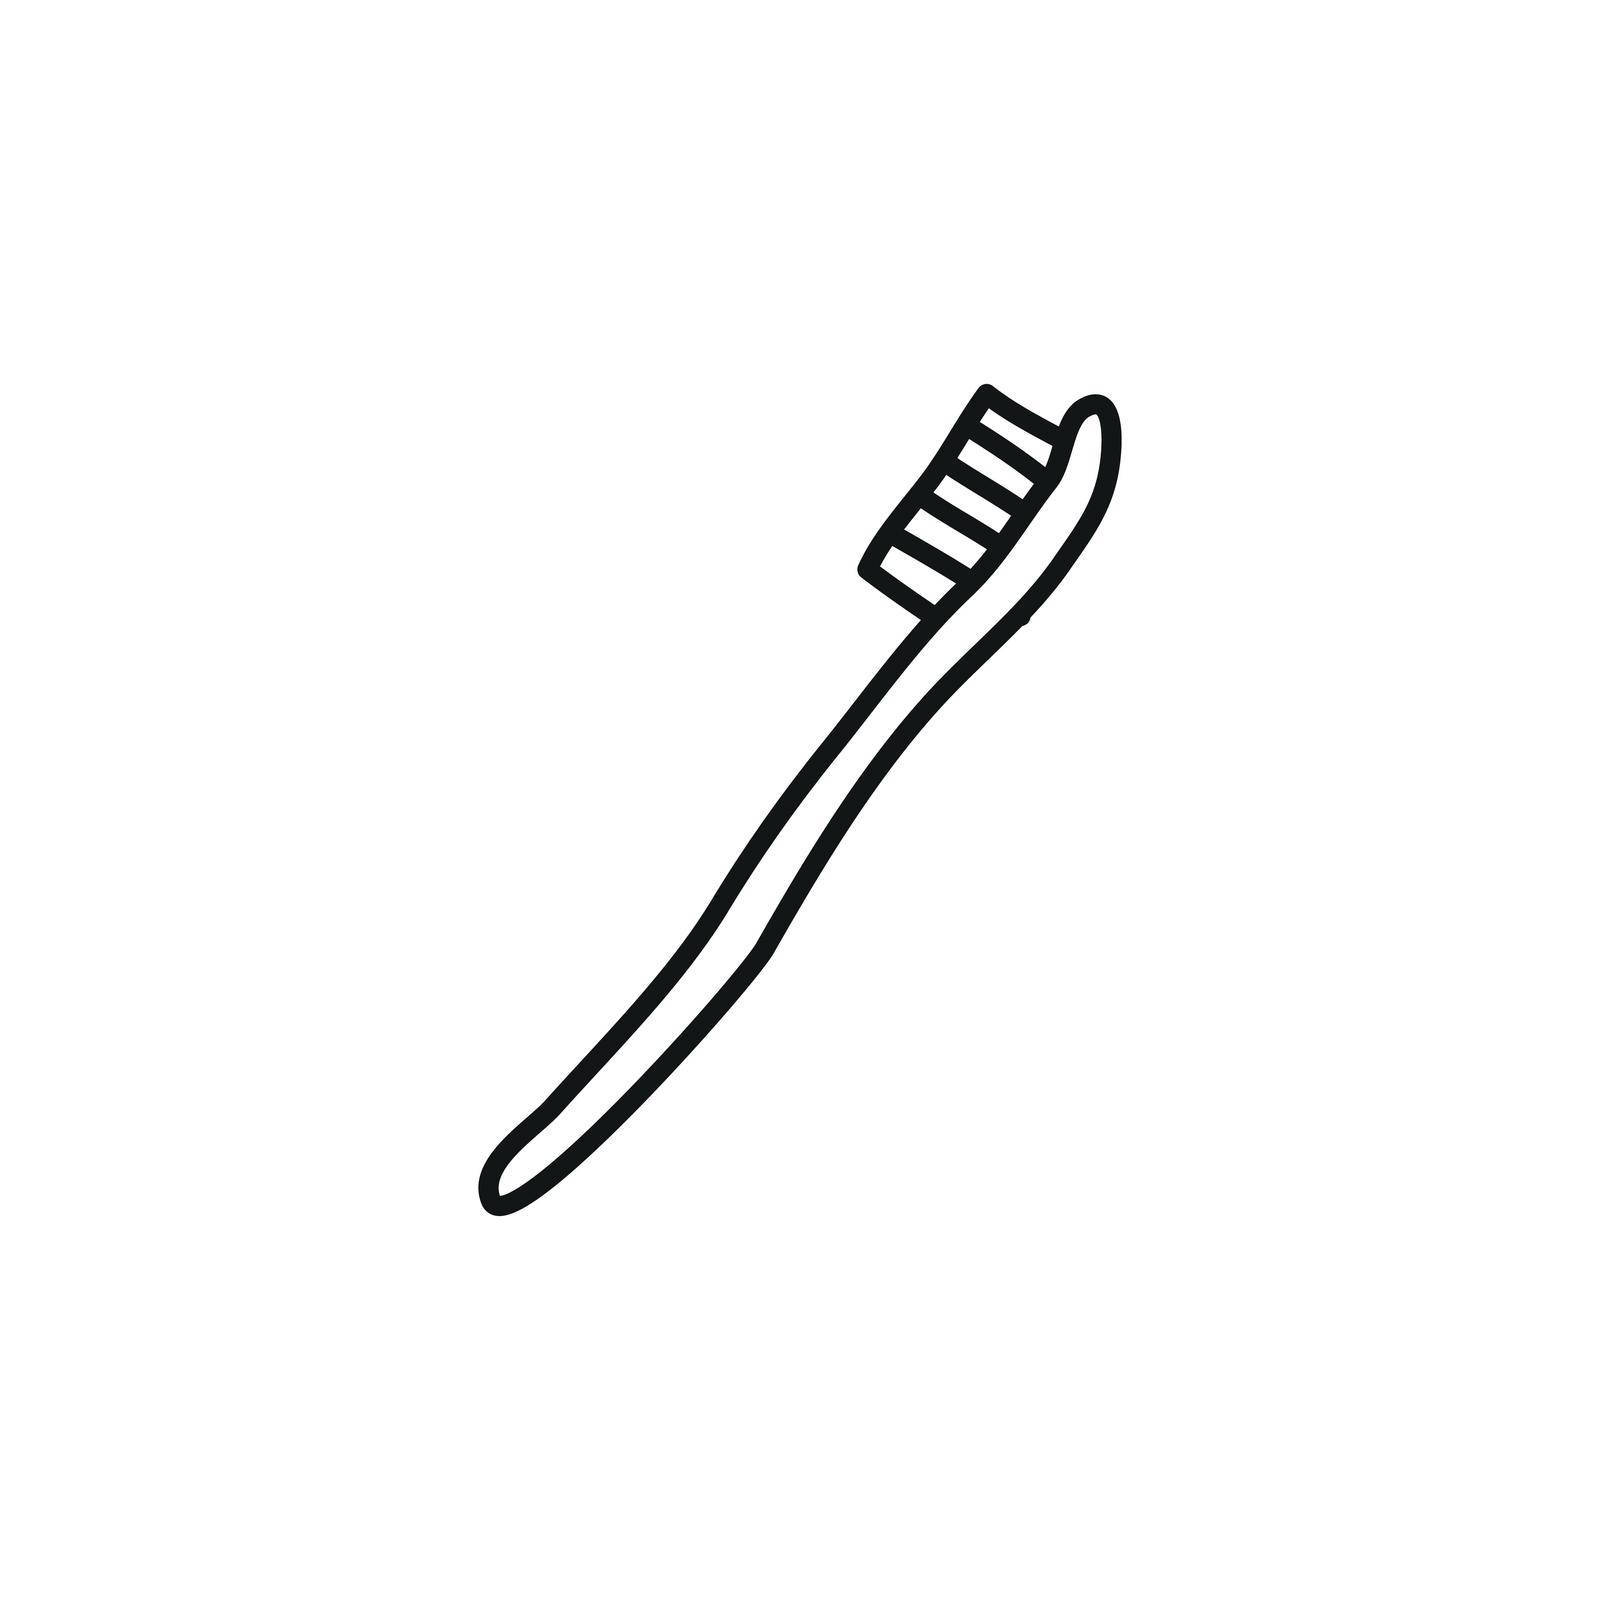 Doodle outline toothbrush isolated on white background.